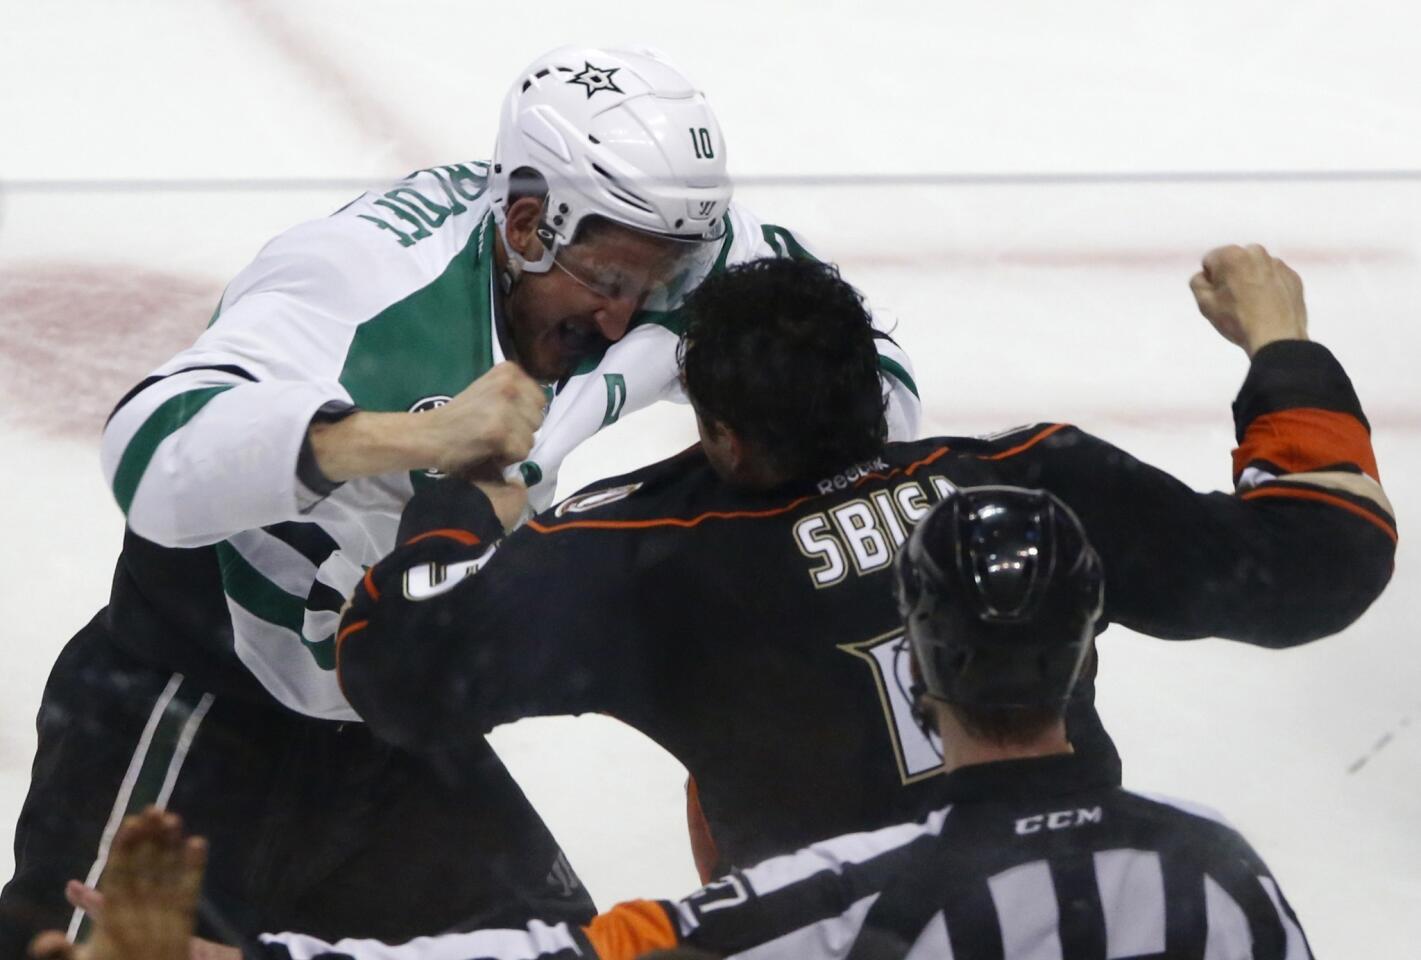 Ducks defenseman Luca Sbisa fights Stars center Shawn Horcoff near the end of the third period of Game 5 on Friday night at Honda Center in Anaheim.